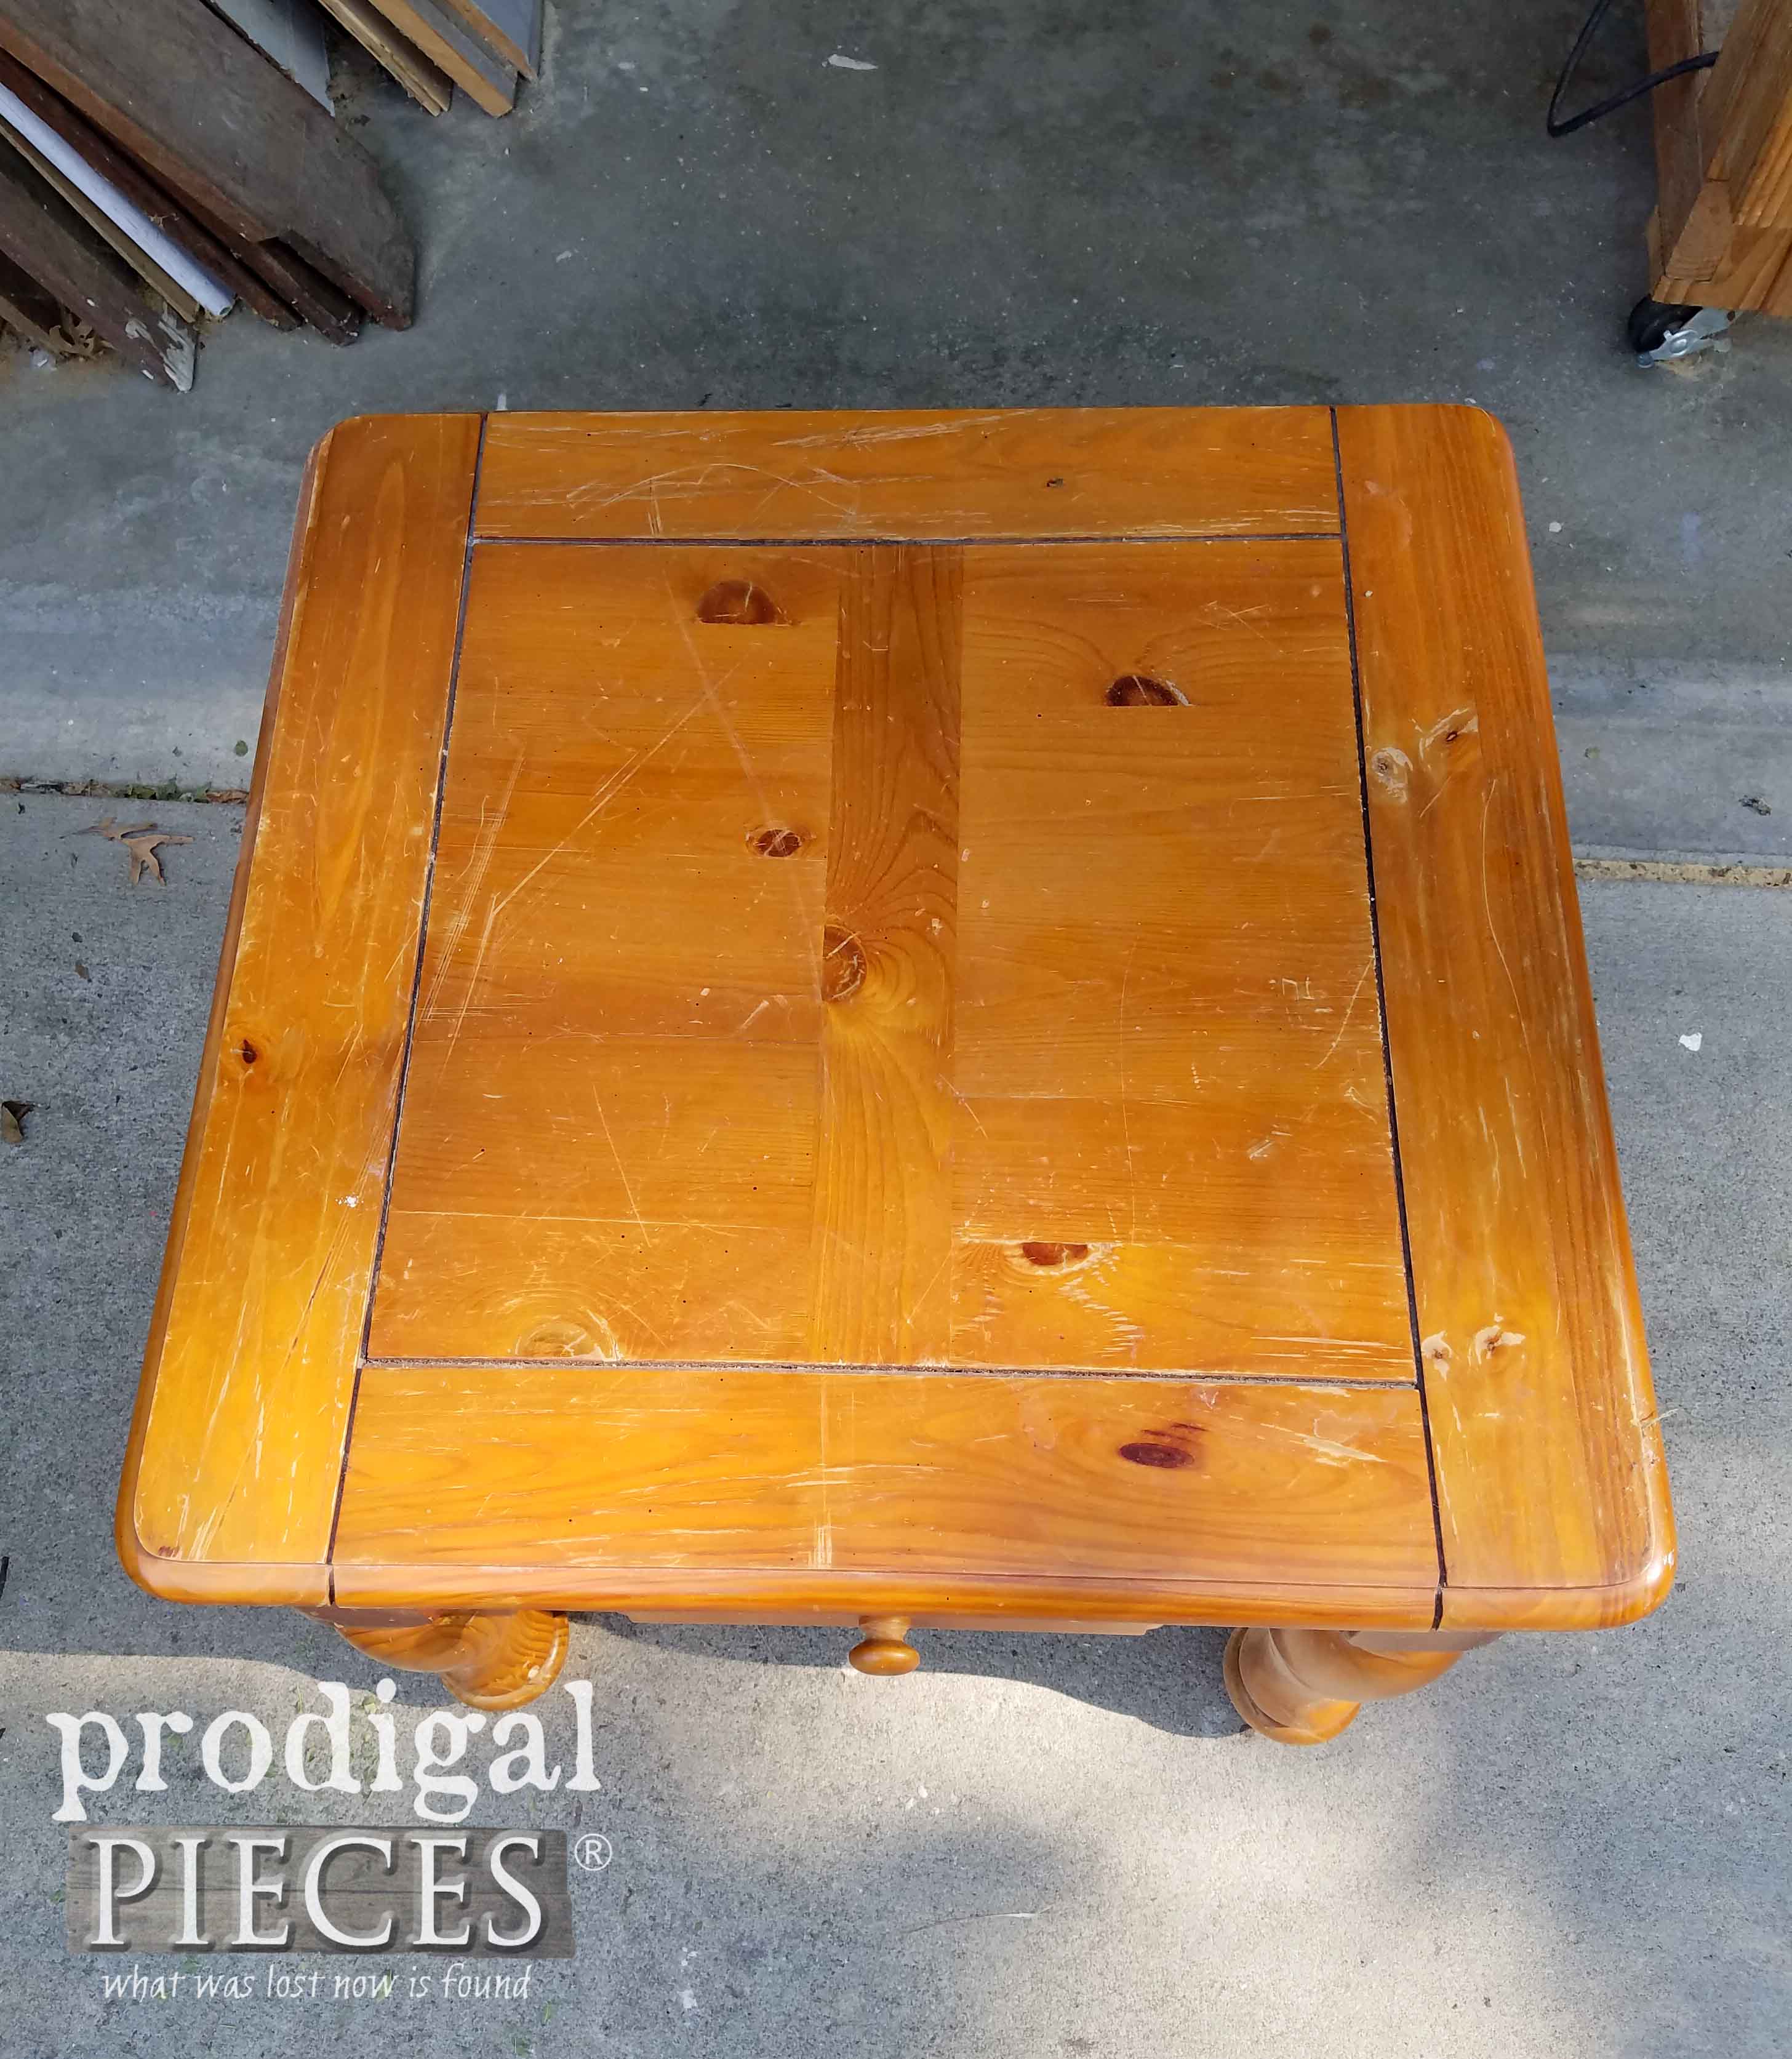 Curbside Side Table Top Damage | prodigalpieces.com